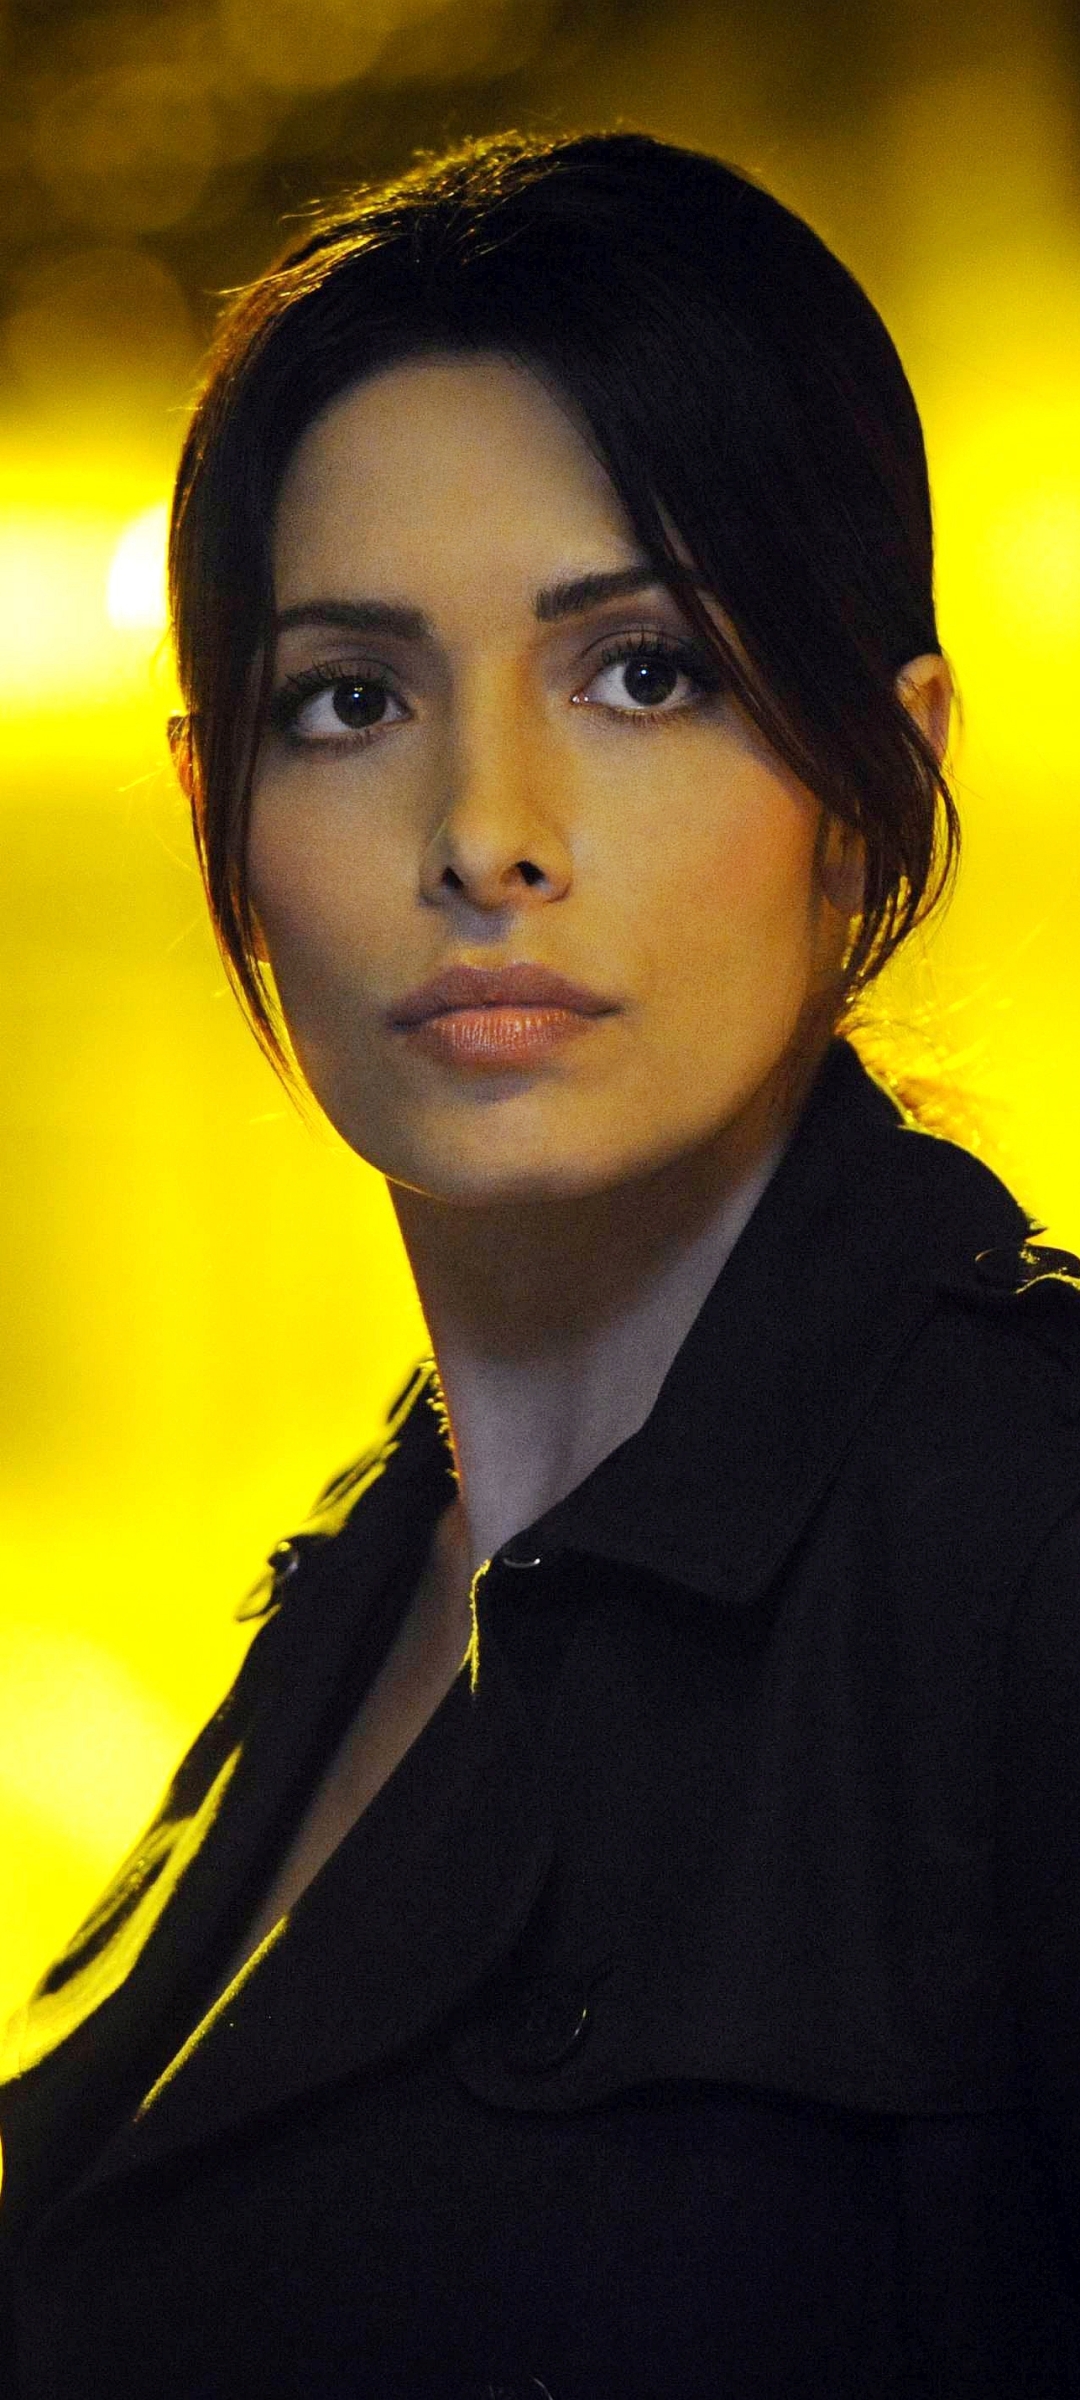 tv show, person of interest, sarah shahi for android